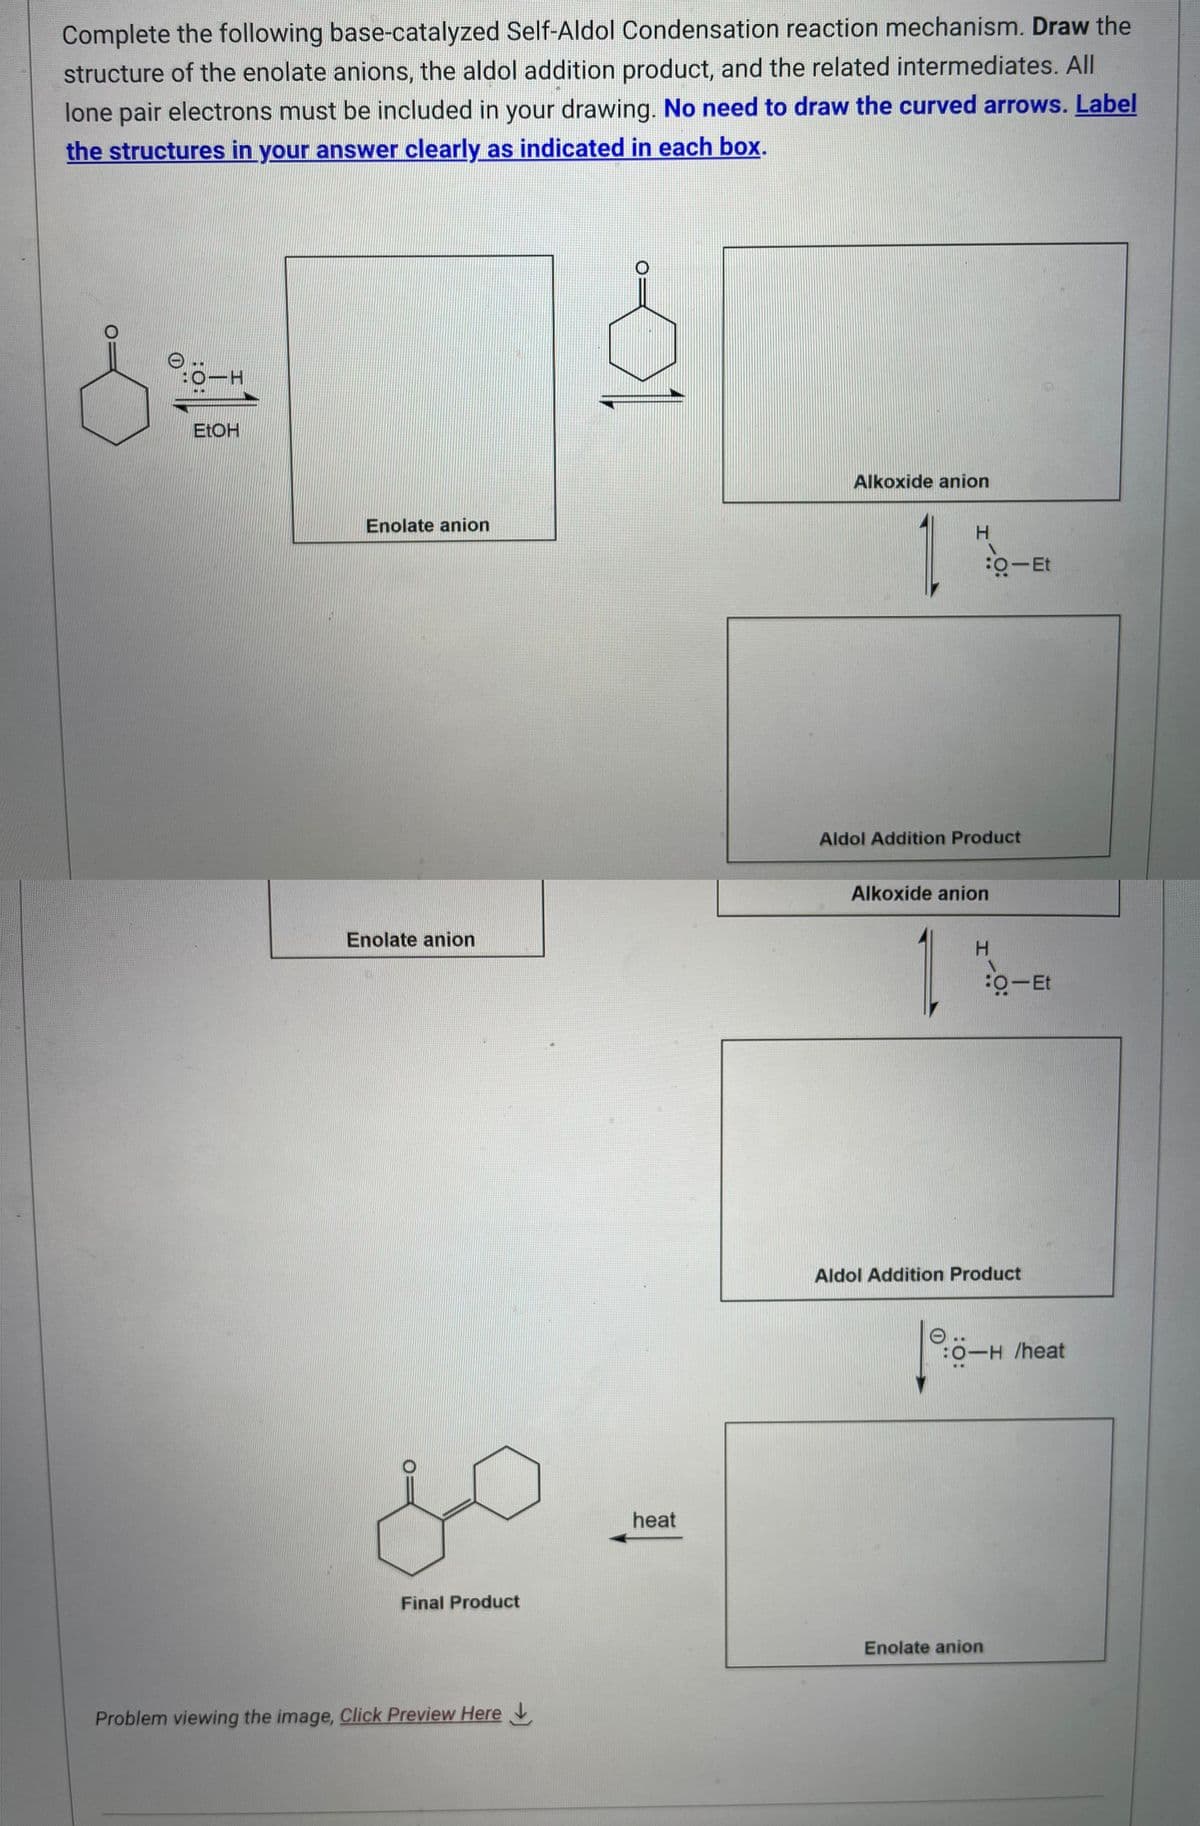 Complete the following base-catalyzed Self-Aldol Condensation reaction mechanism. Draw the
structure of the enolate anions, the aldol addition product, and the related intermediates. All
lone pair electrons must be included in your drawing. No need to draw the curved arrows. Label
the structures in your answer clearly as indicated in each box.
d
0:0-H
EtOH
Enolate anion
Enolate anion
do
Final Product
Problem viewing the image, Click Preview Here
heat
Alkoxide anion
H
1%
Aldol Addition Product
Alkoxide anion
1
H
o-Et
o-Et
Aldol Addition Product
Enolate anion
:O-H /heat